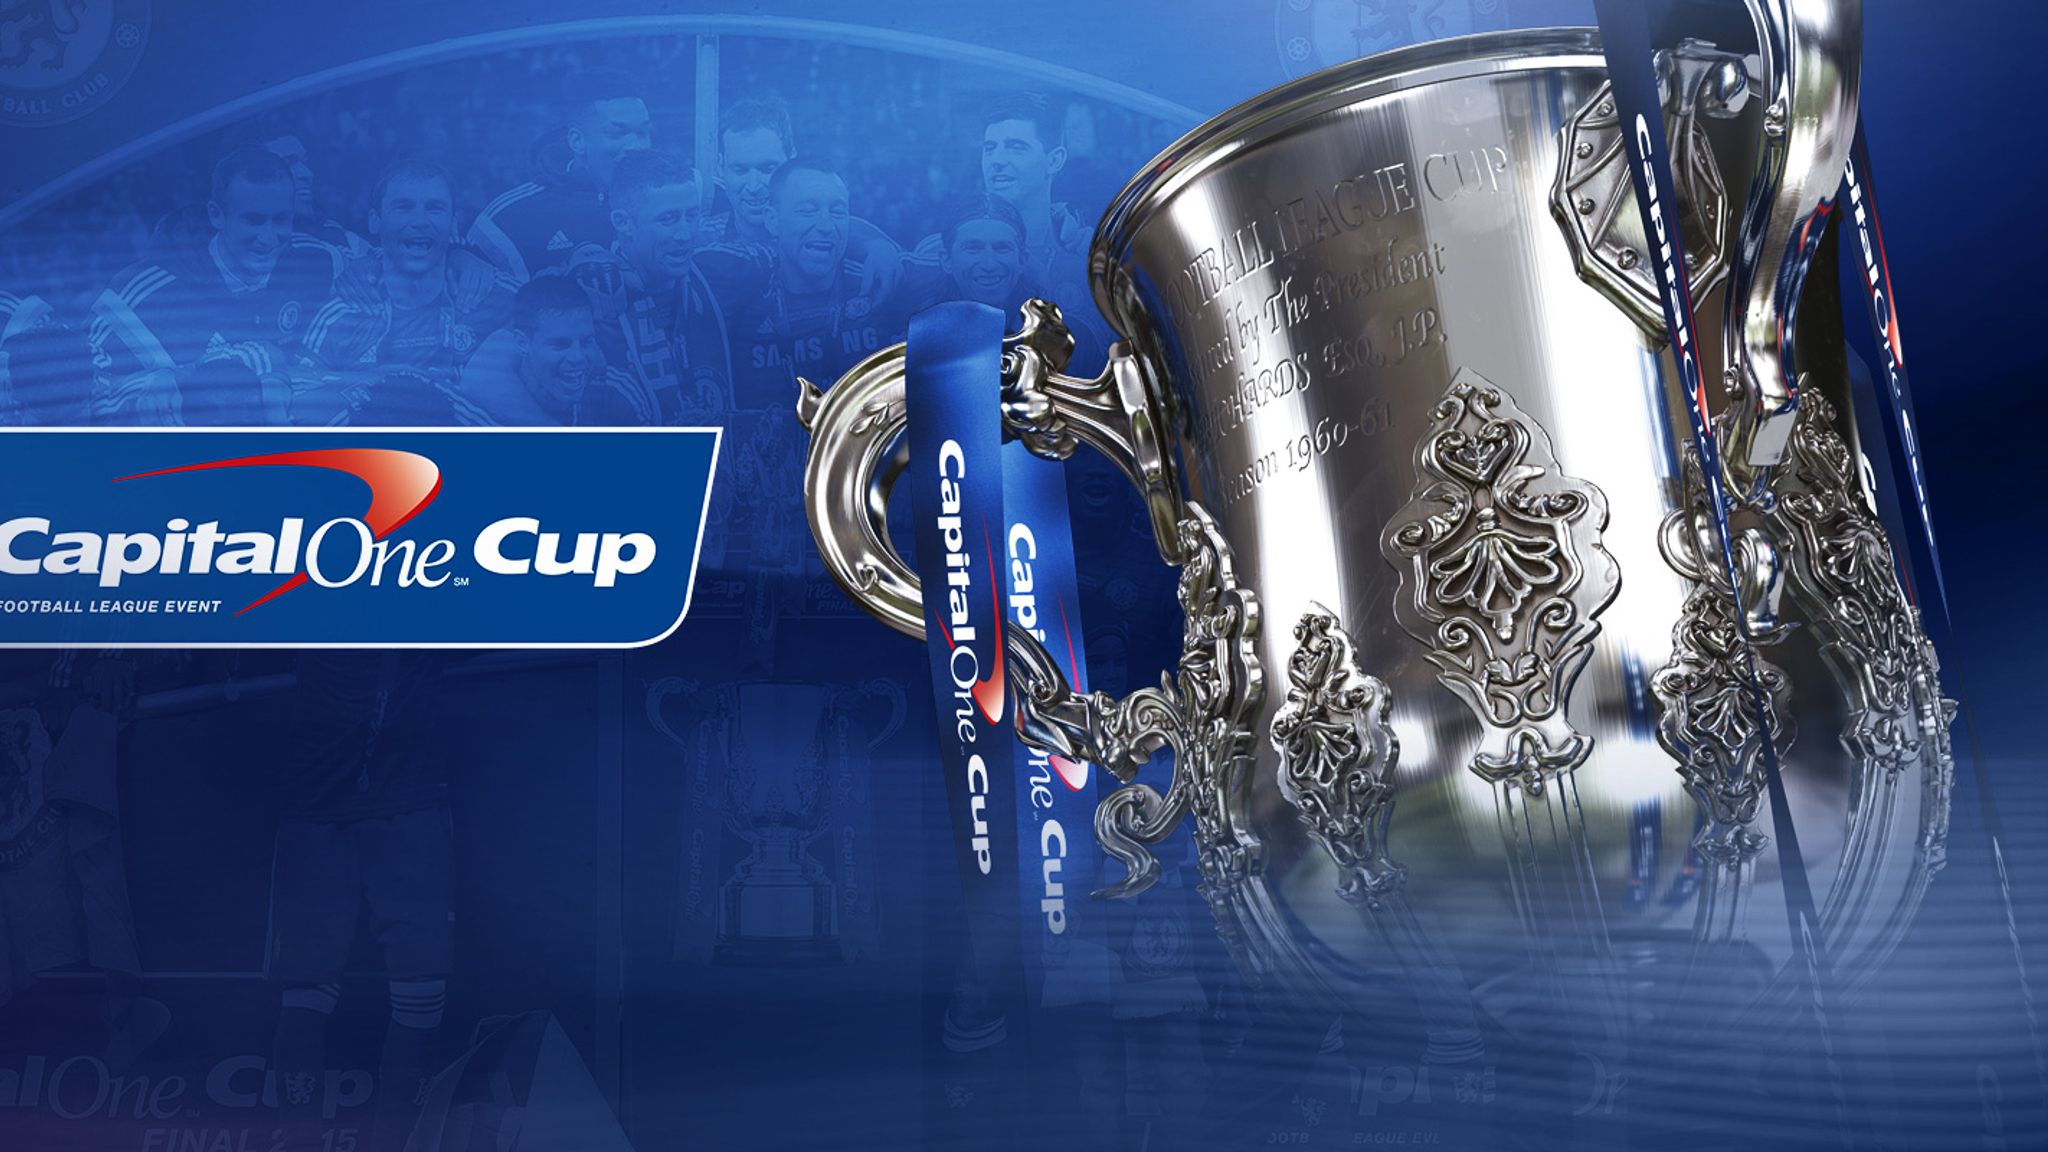 First cup. One Cup. Capital one Cup. League 1 Cup. Все победители Capital one Cup.